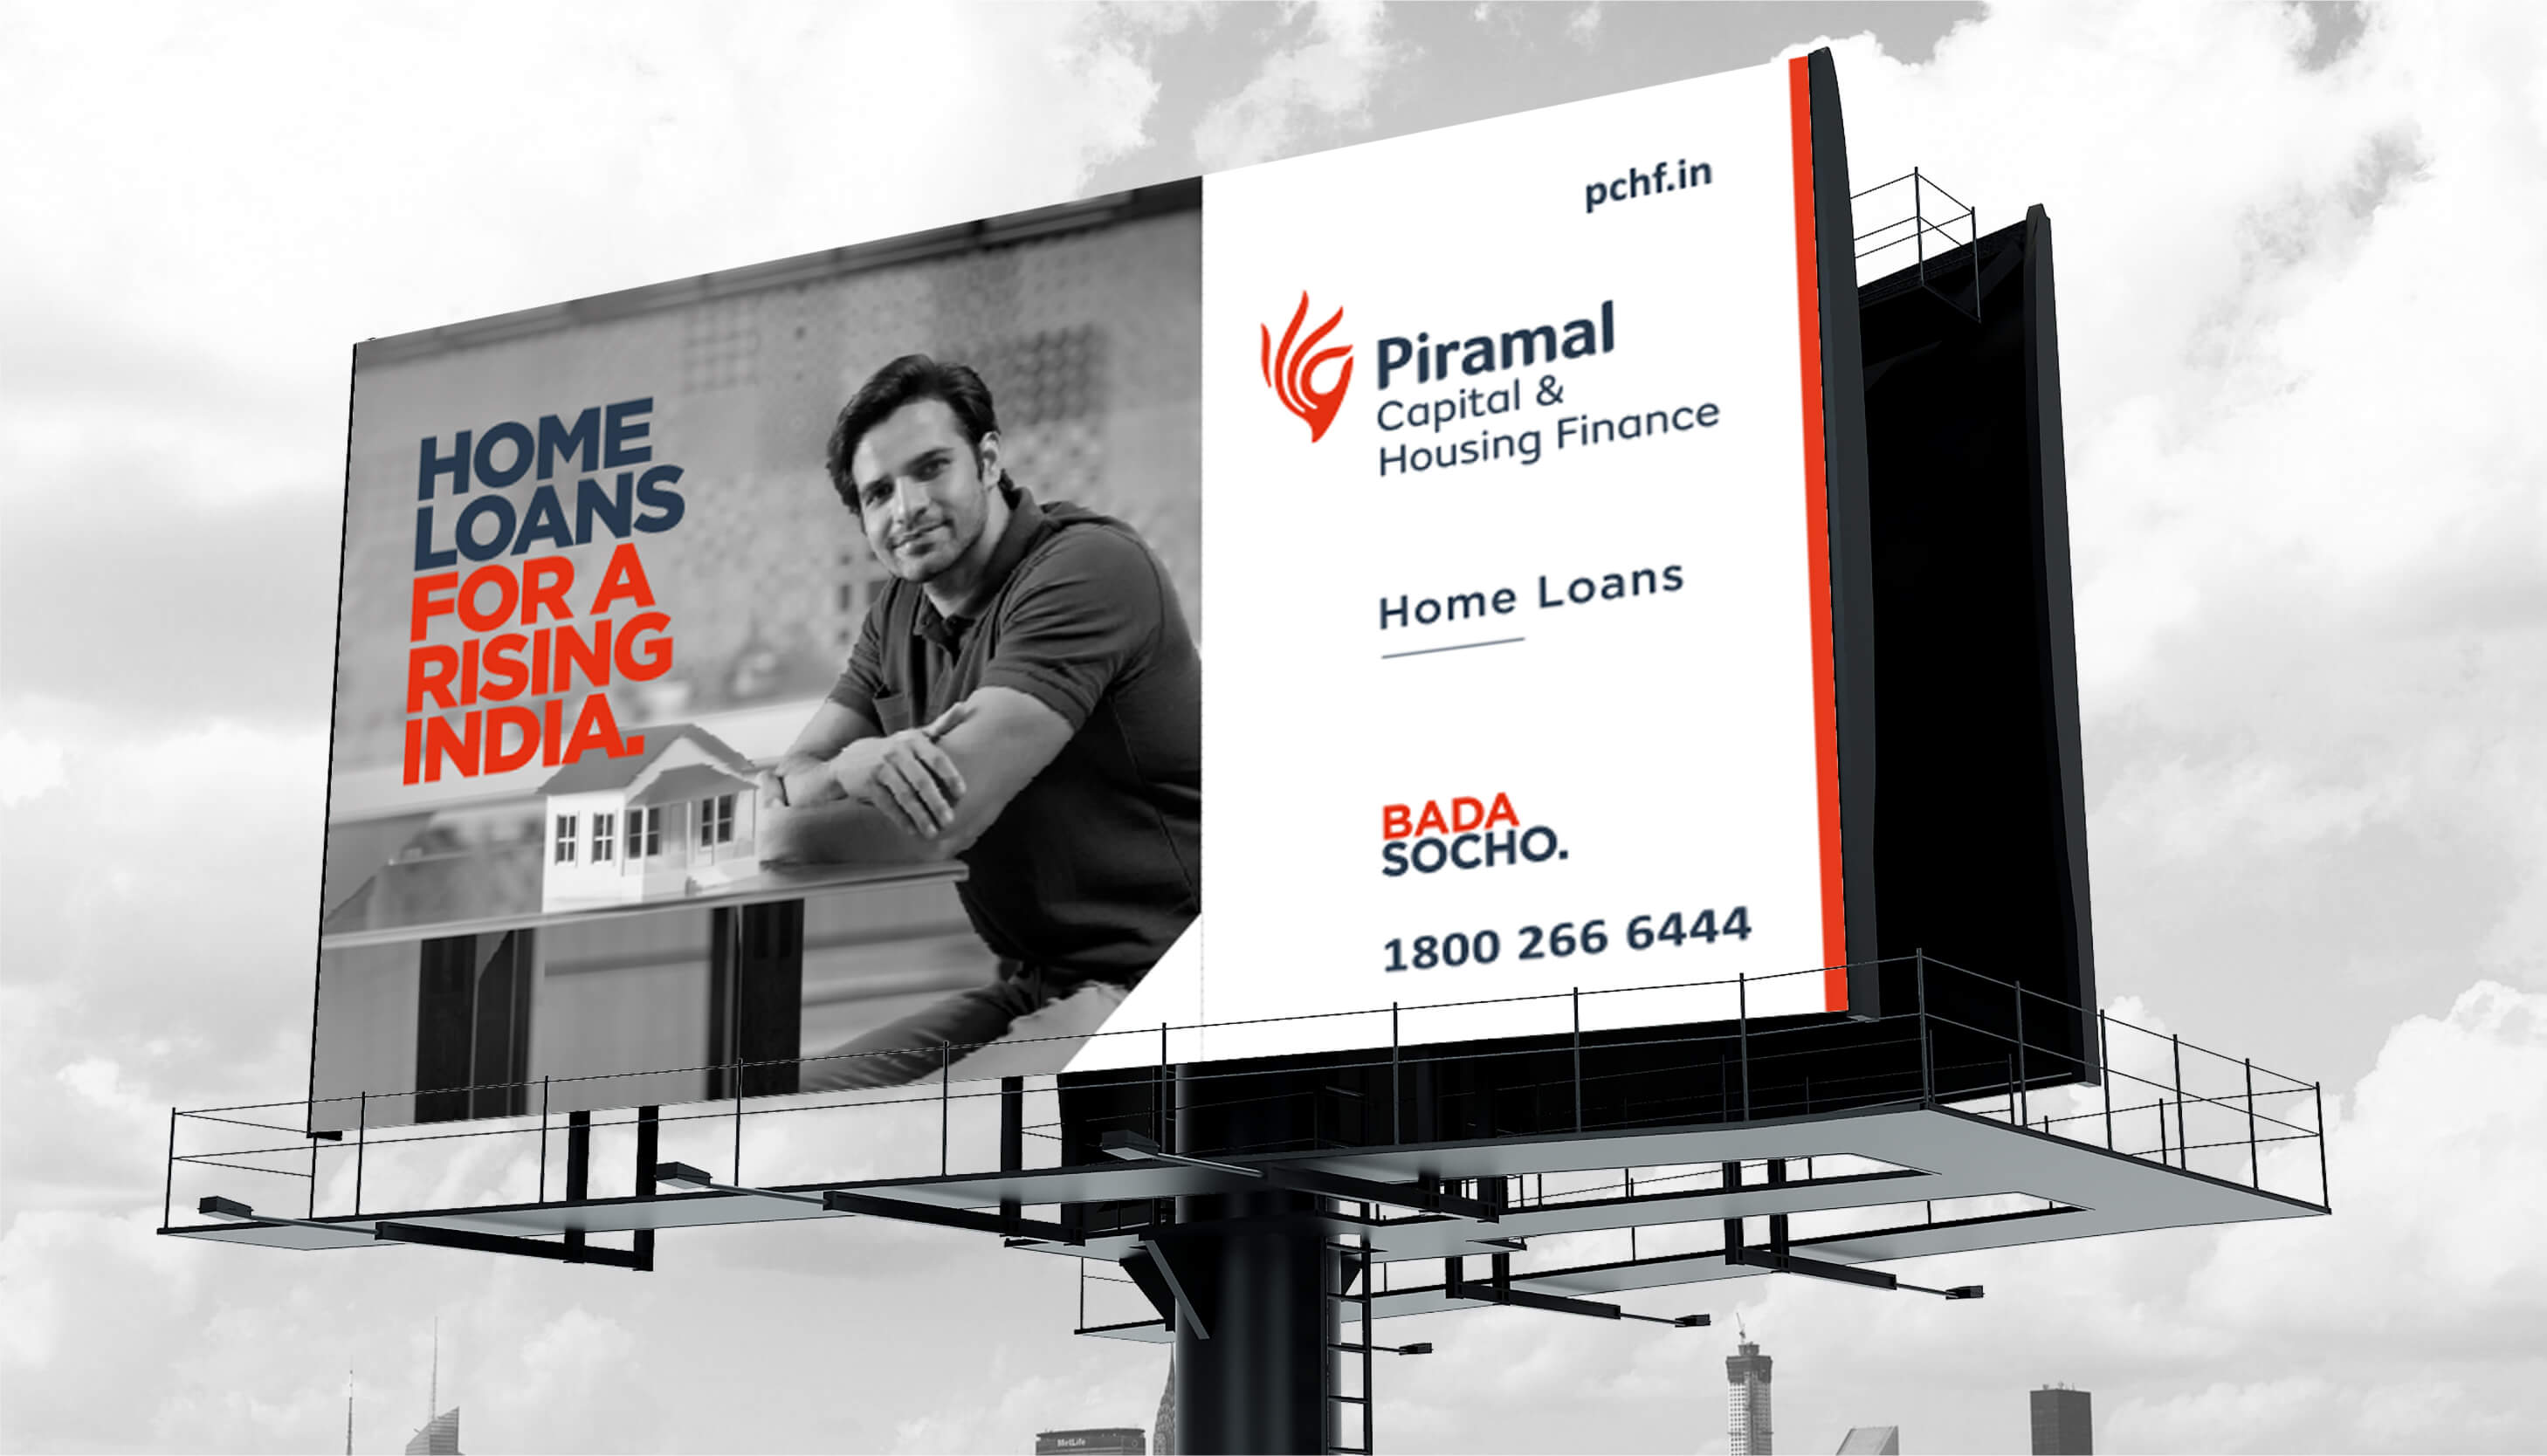 Outdoor Advertising services for Piramal